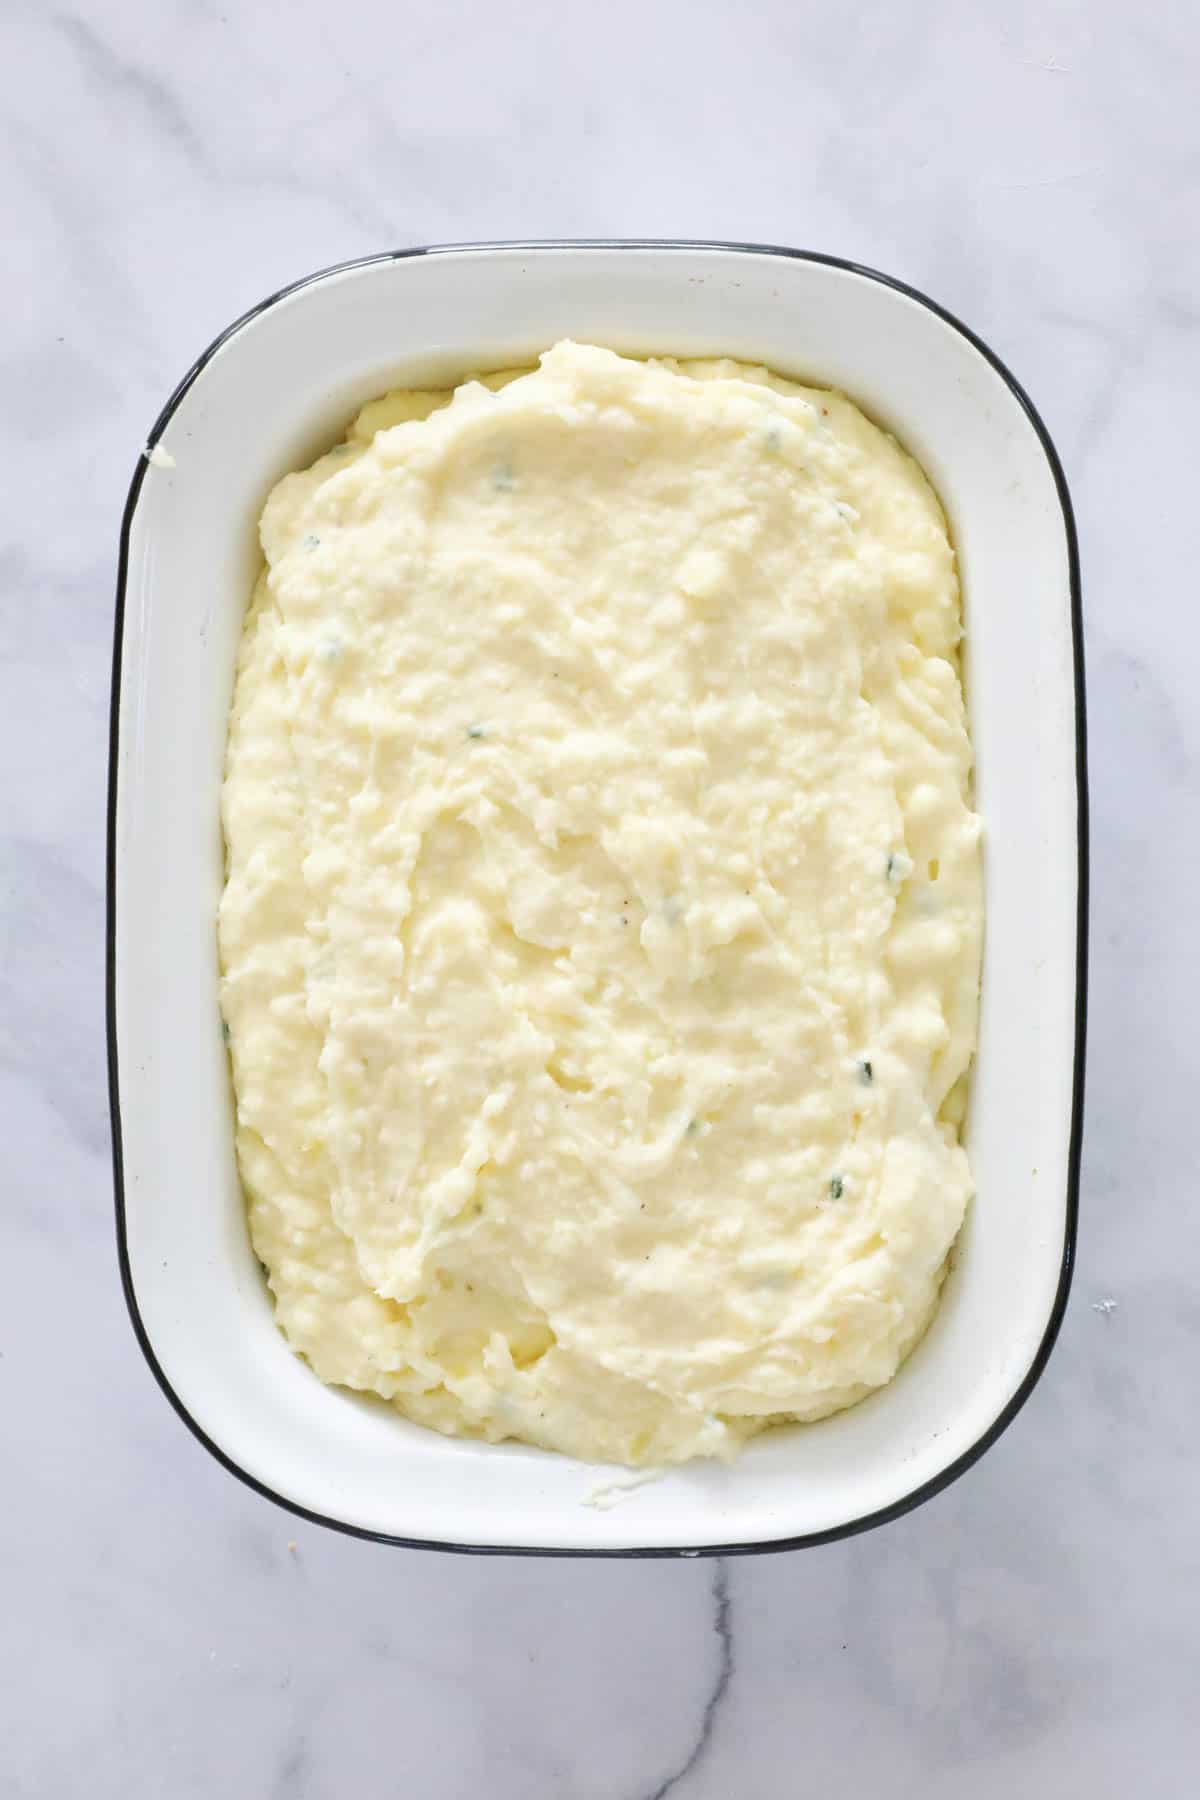 Mashed potatoes spooned into a baking dish.